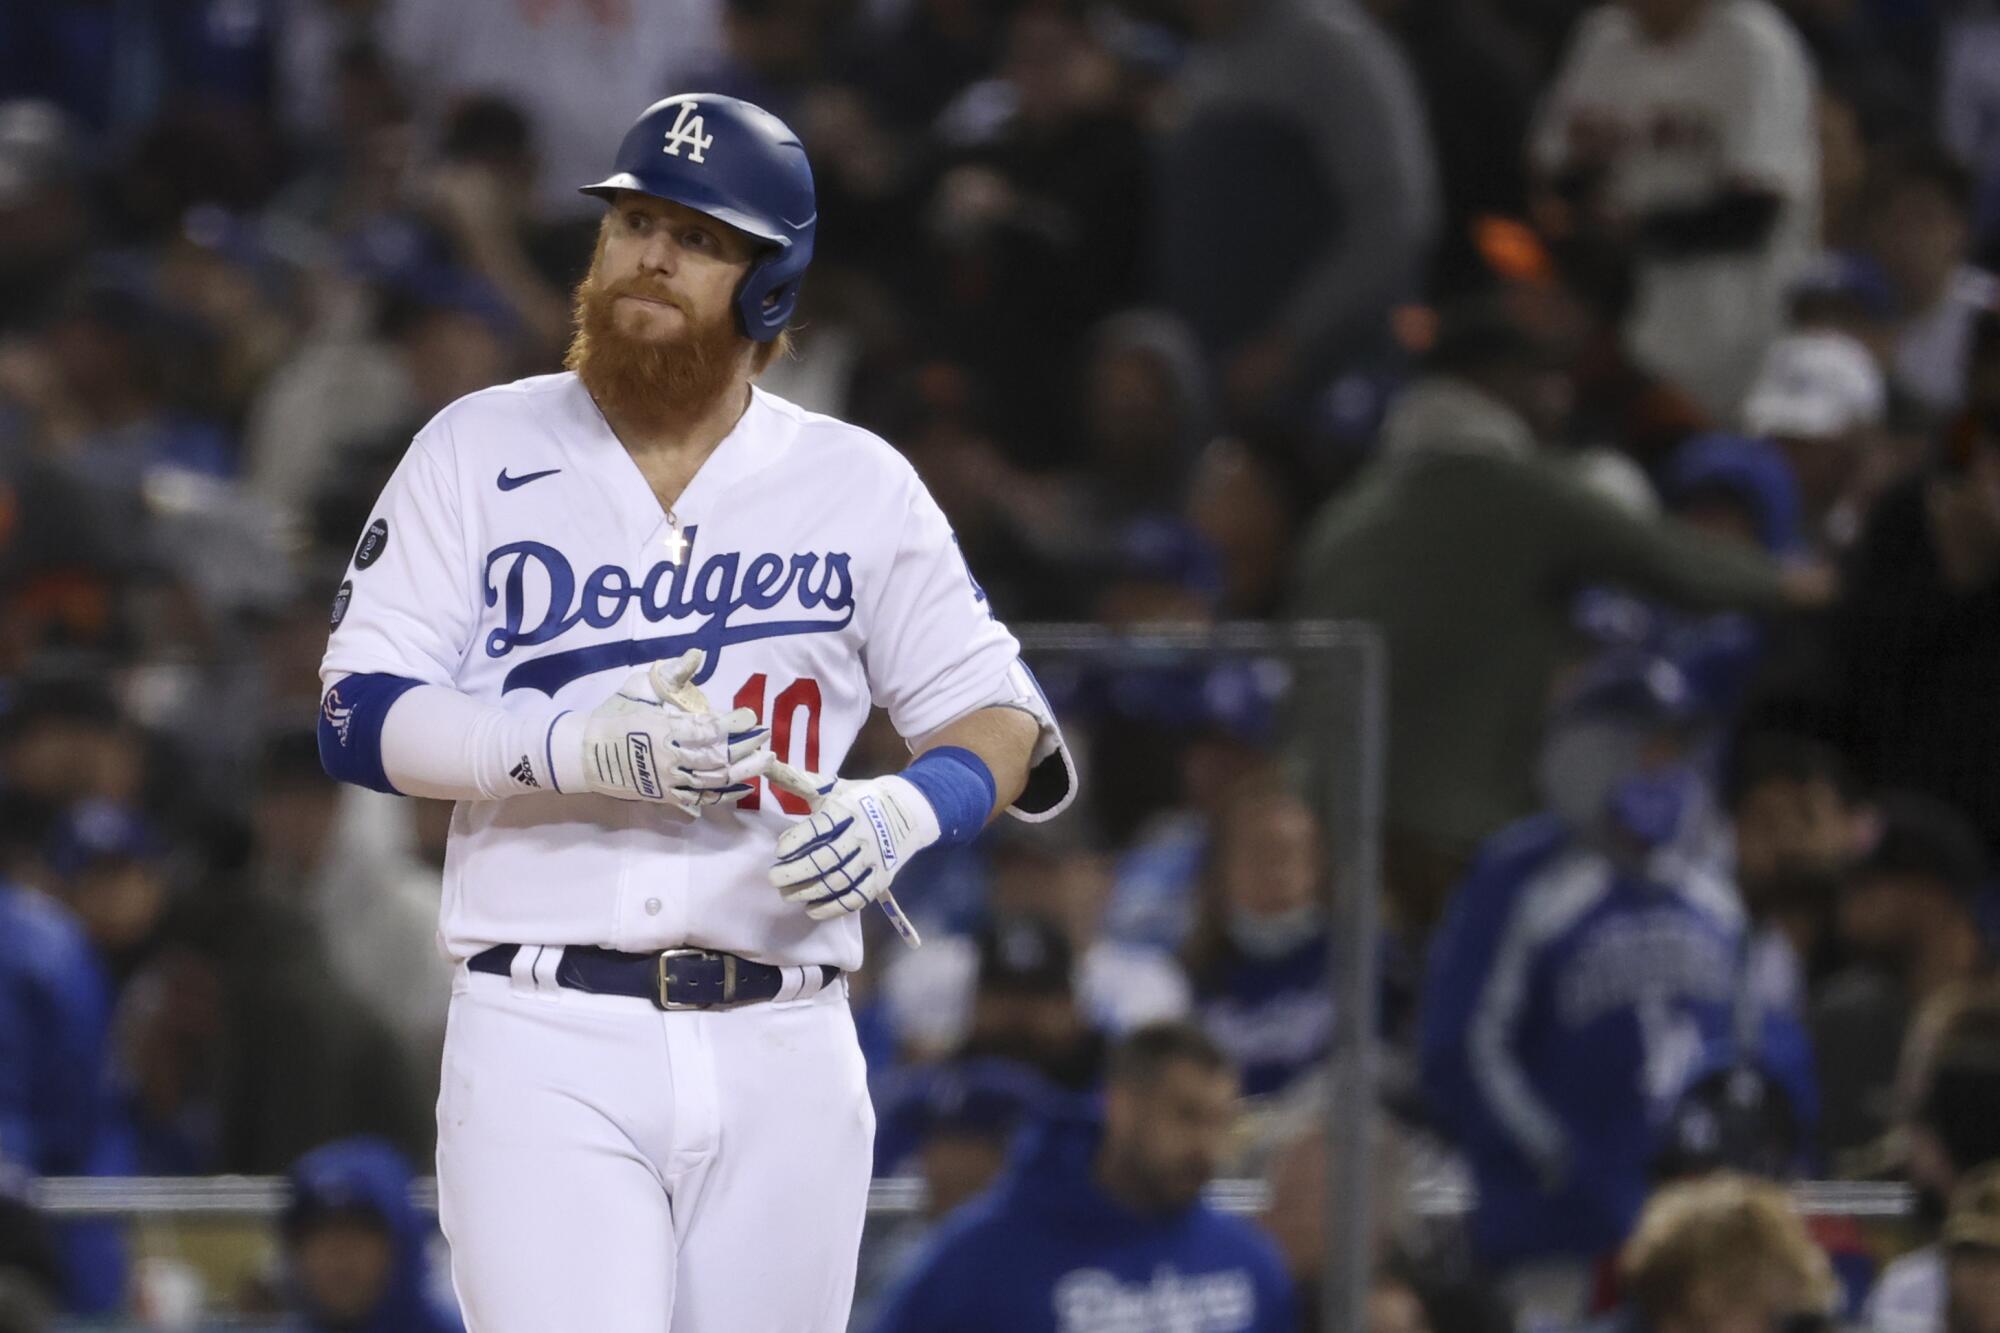 Dodgers batter Justin Turner walks off first after flying out to end the eighth inning.